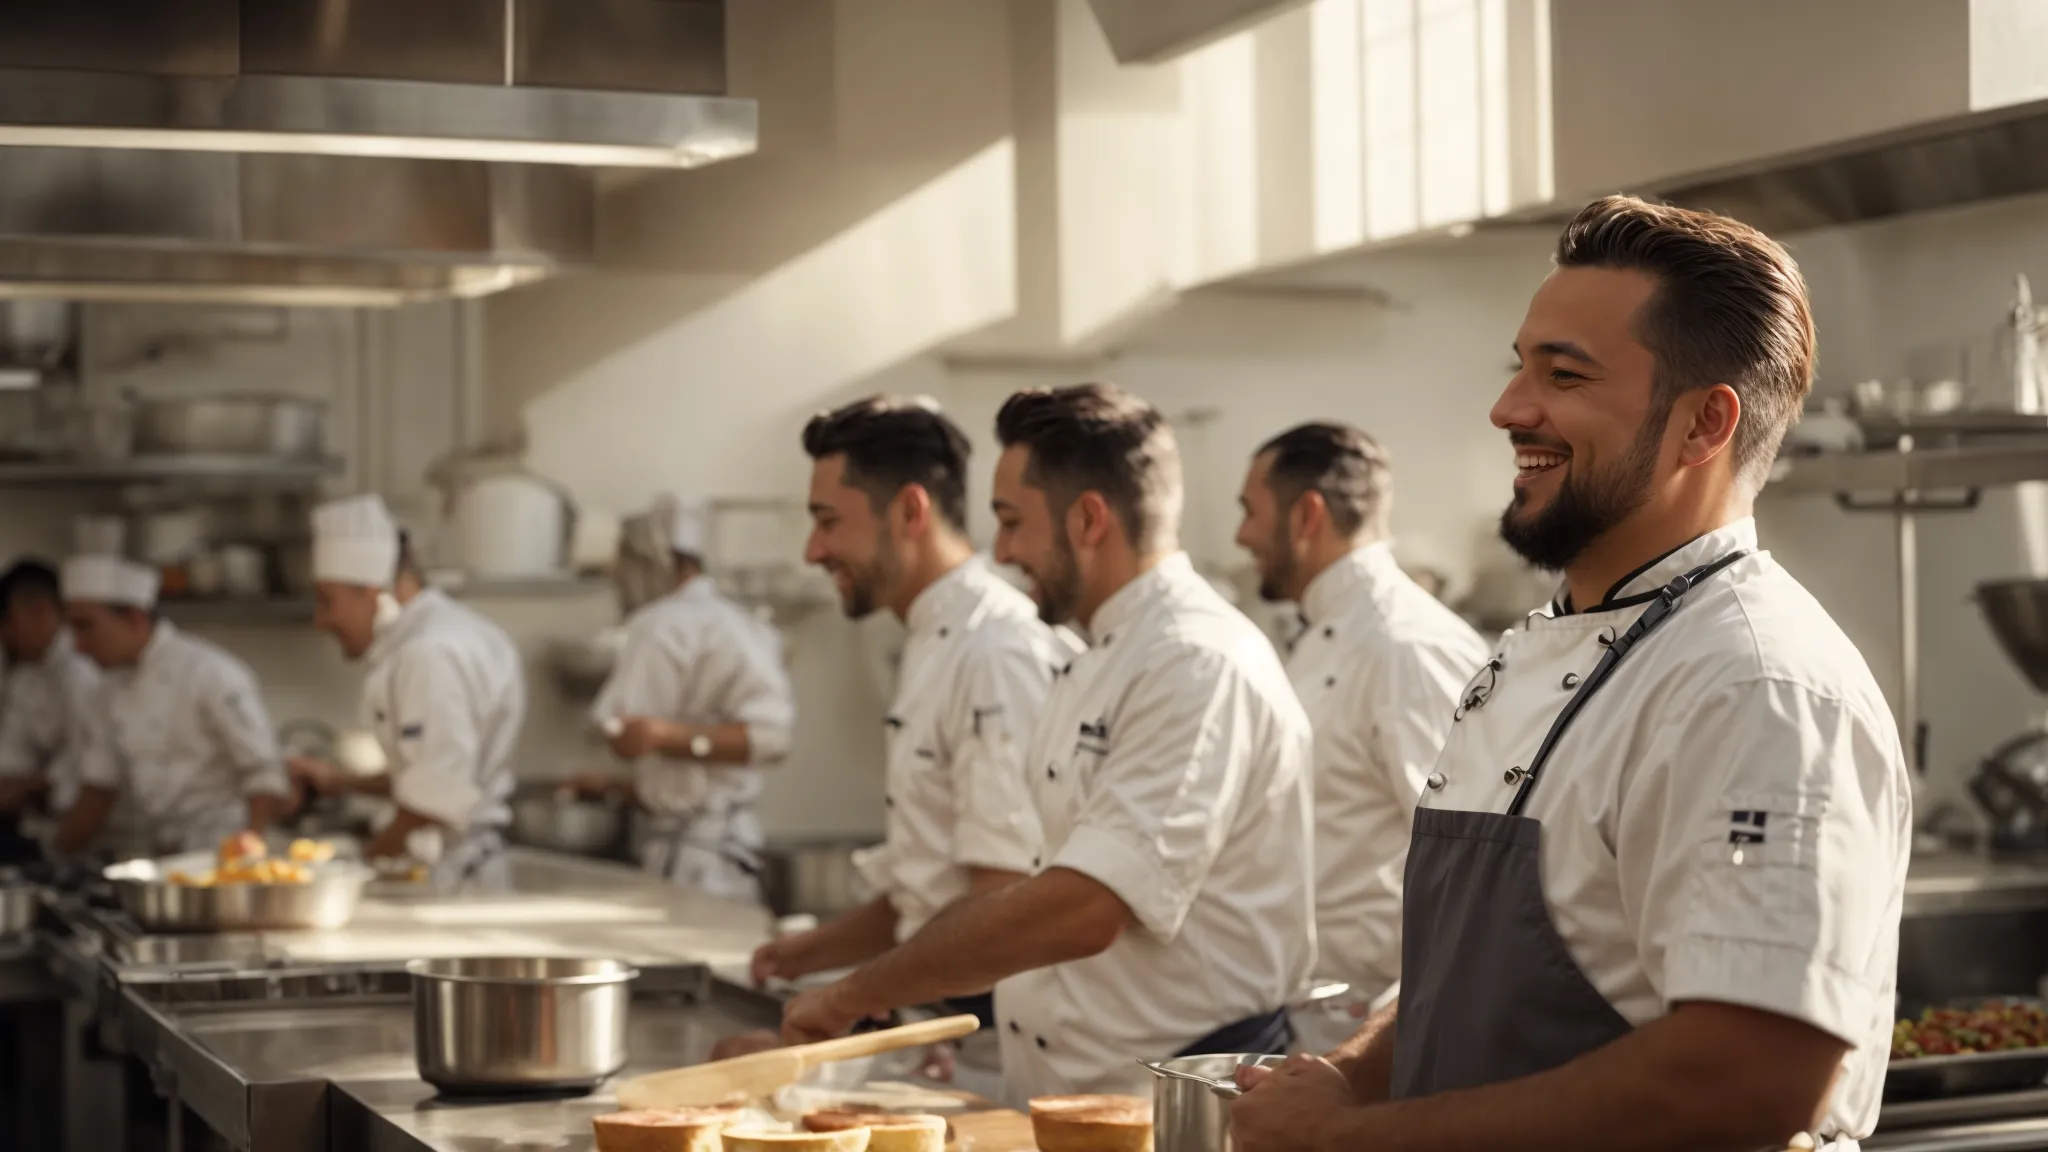 a team of chefs and kitchen workers cheerfully collaborate in a spotless, sunlit kitchen.